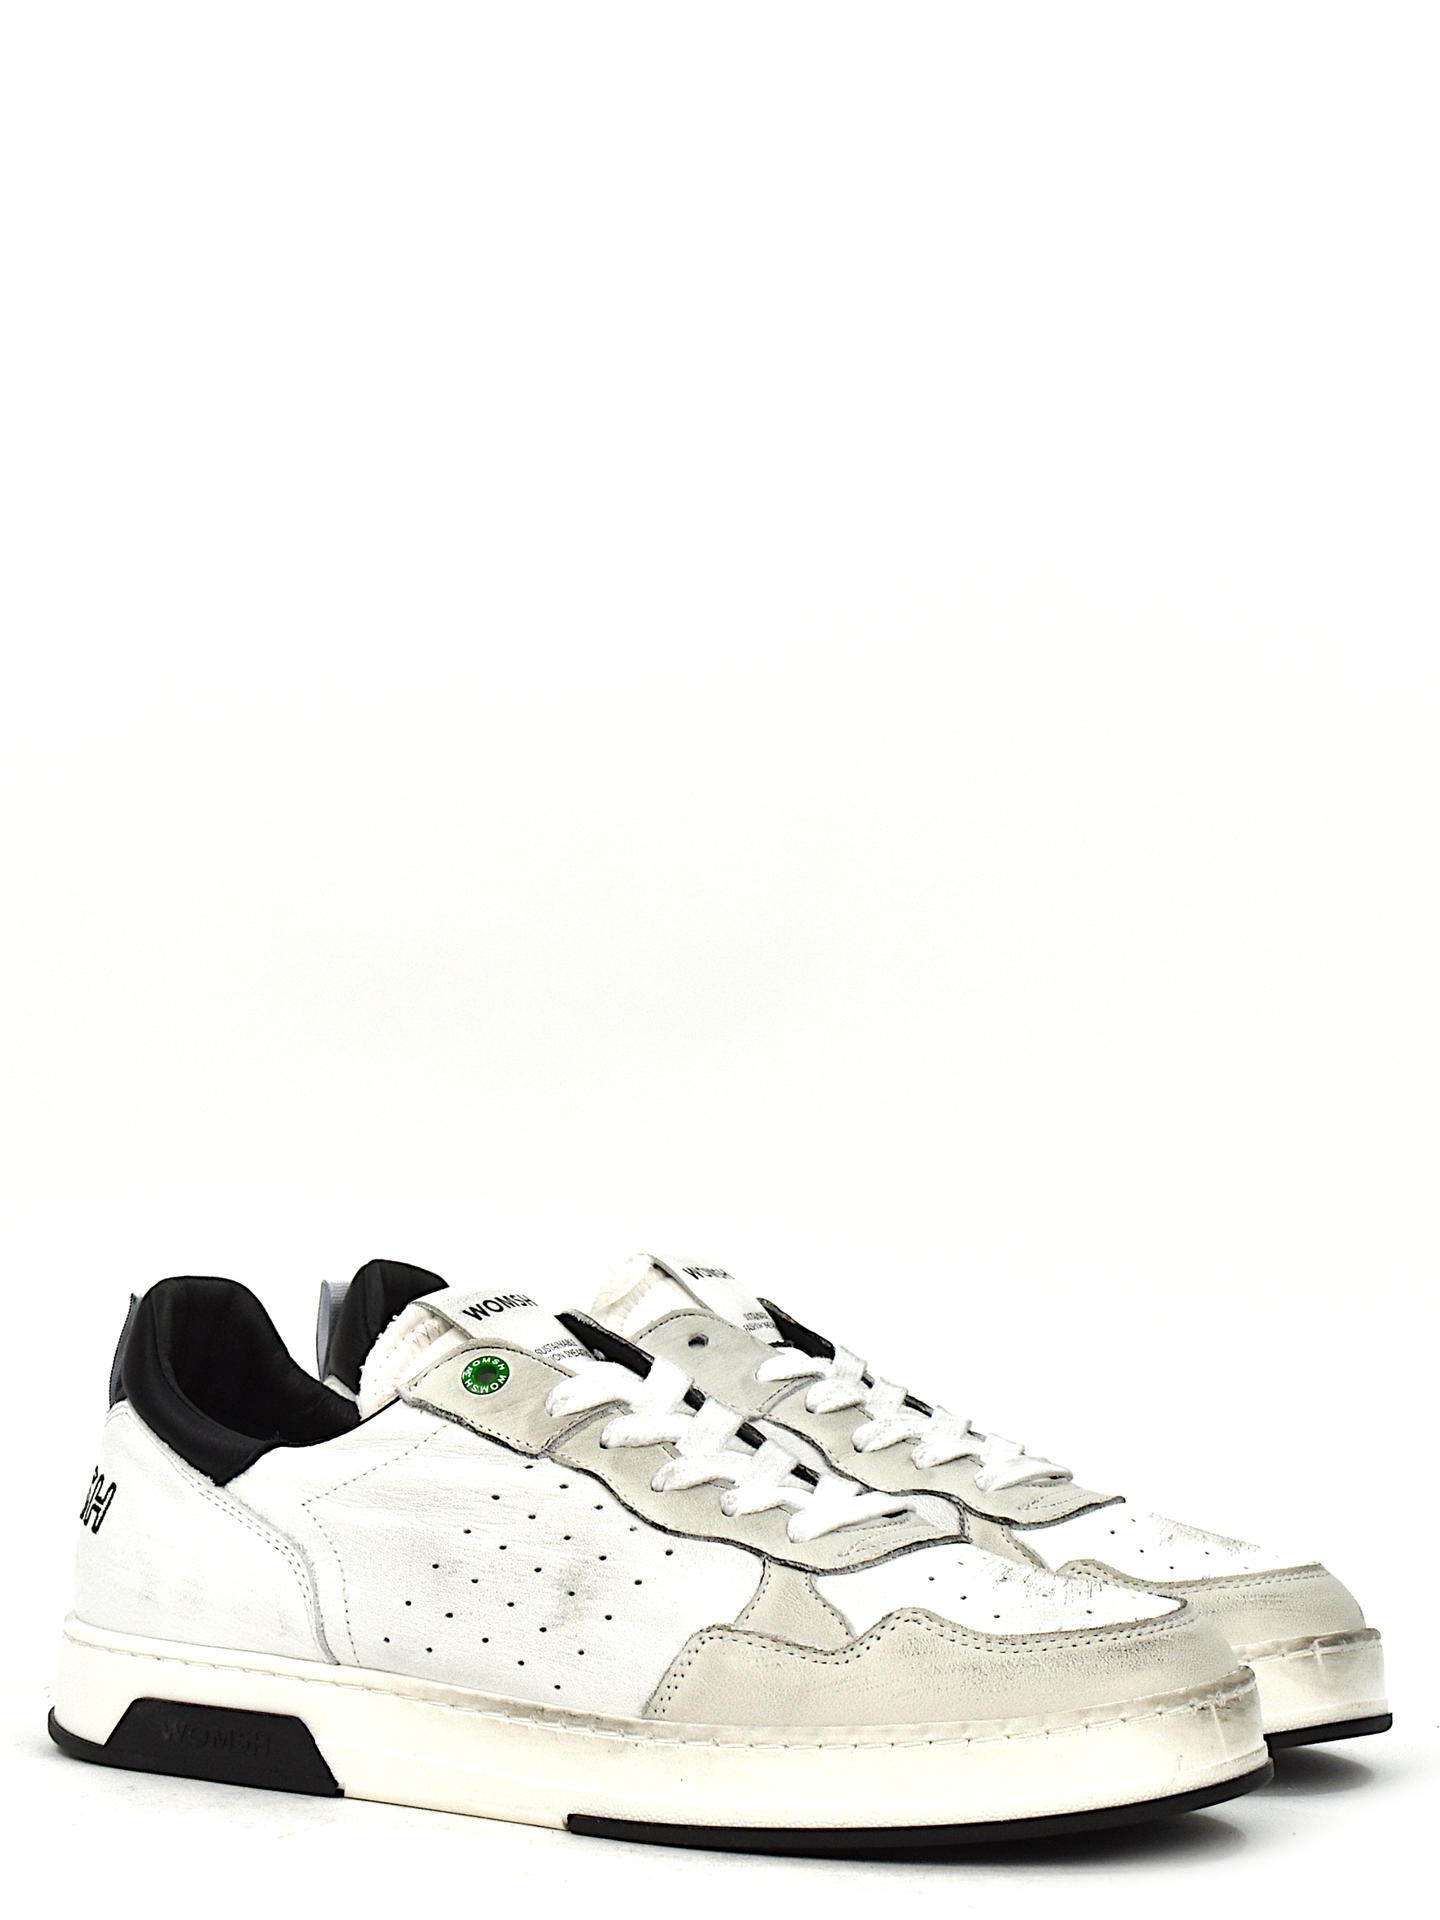 SNEAKERS WOMSH HY096 BIANCO/NERO